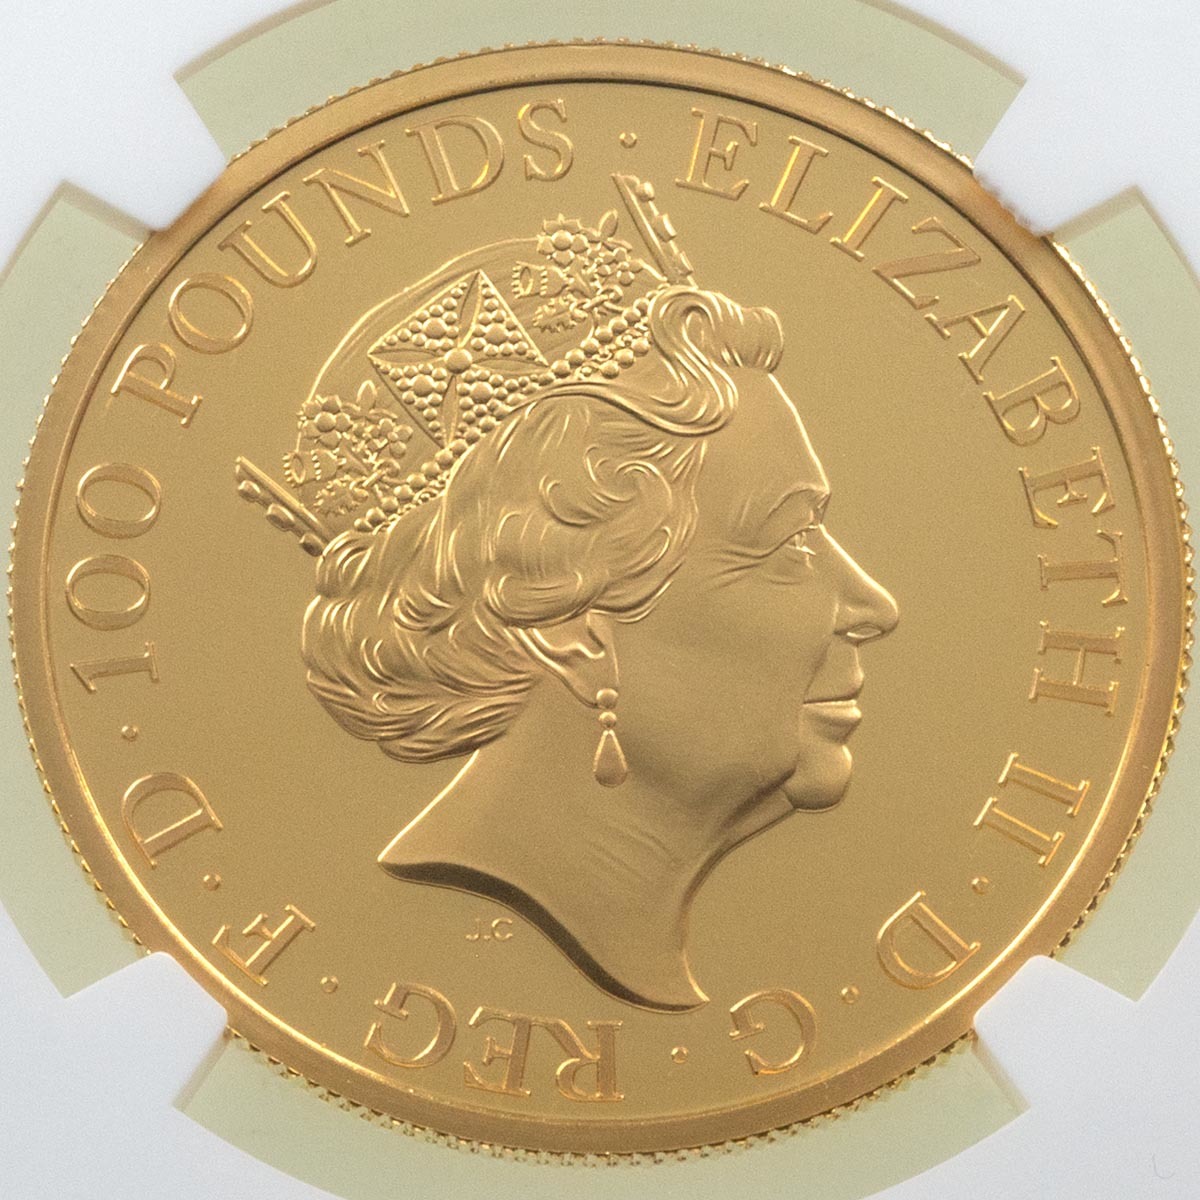 UK19QFGP 2019 Queen's Beasts Falcon Of The Plantagenets One Ounce Gold Proof Coin NGC Graded PF 69 Ultra Cameo Obverse